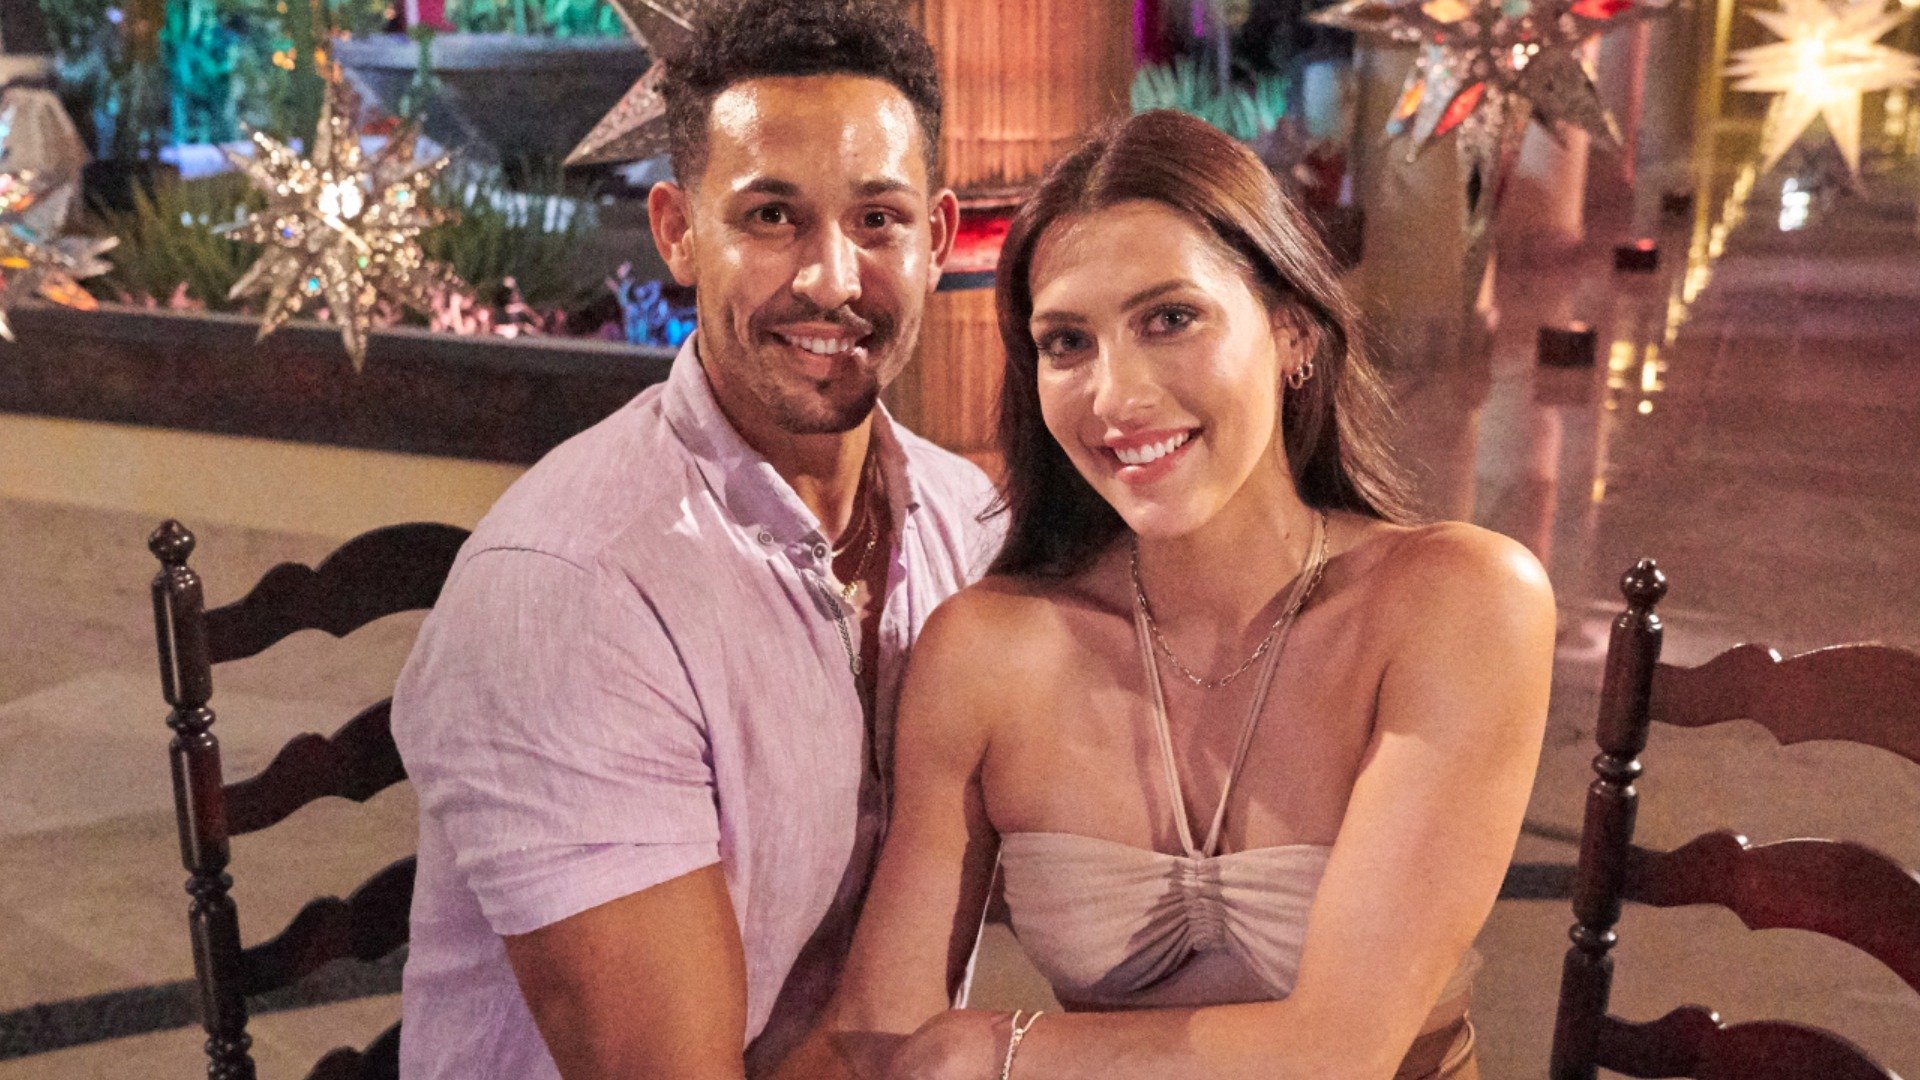 Thomas Jacobs and Rebecca (Becca) Kufrin on their first date together in ‘Bachelor in Paradise’ Season 17 in 2021